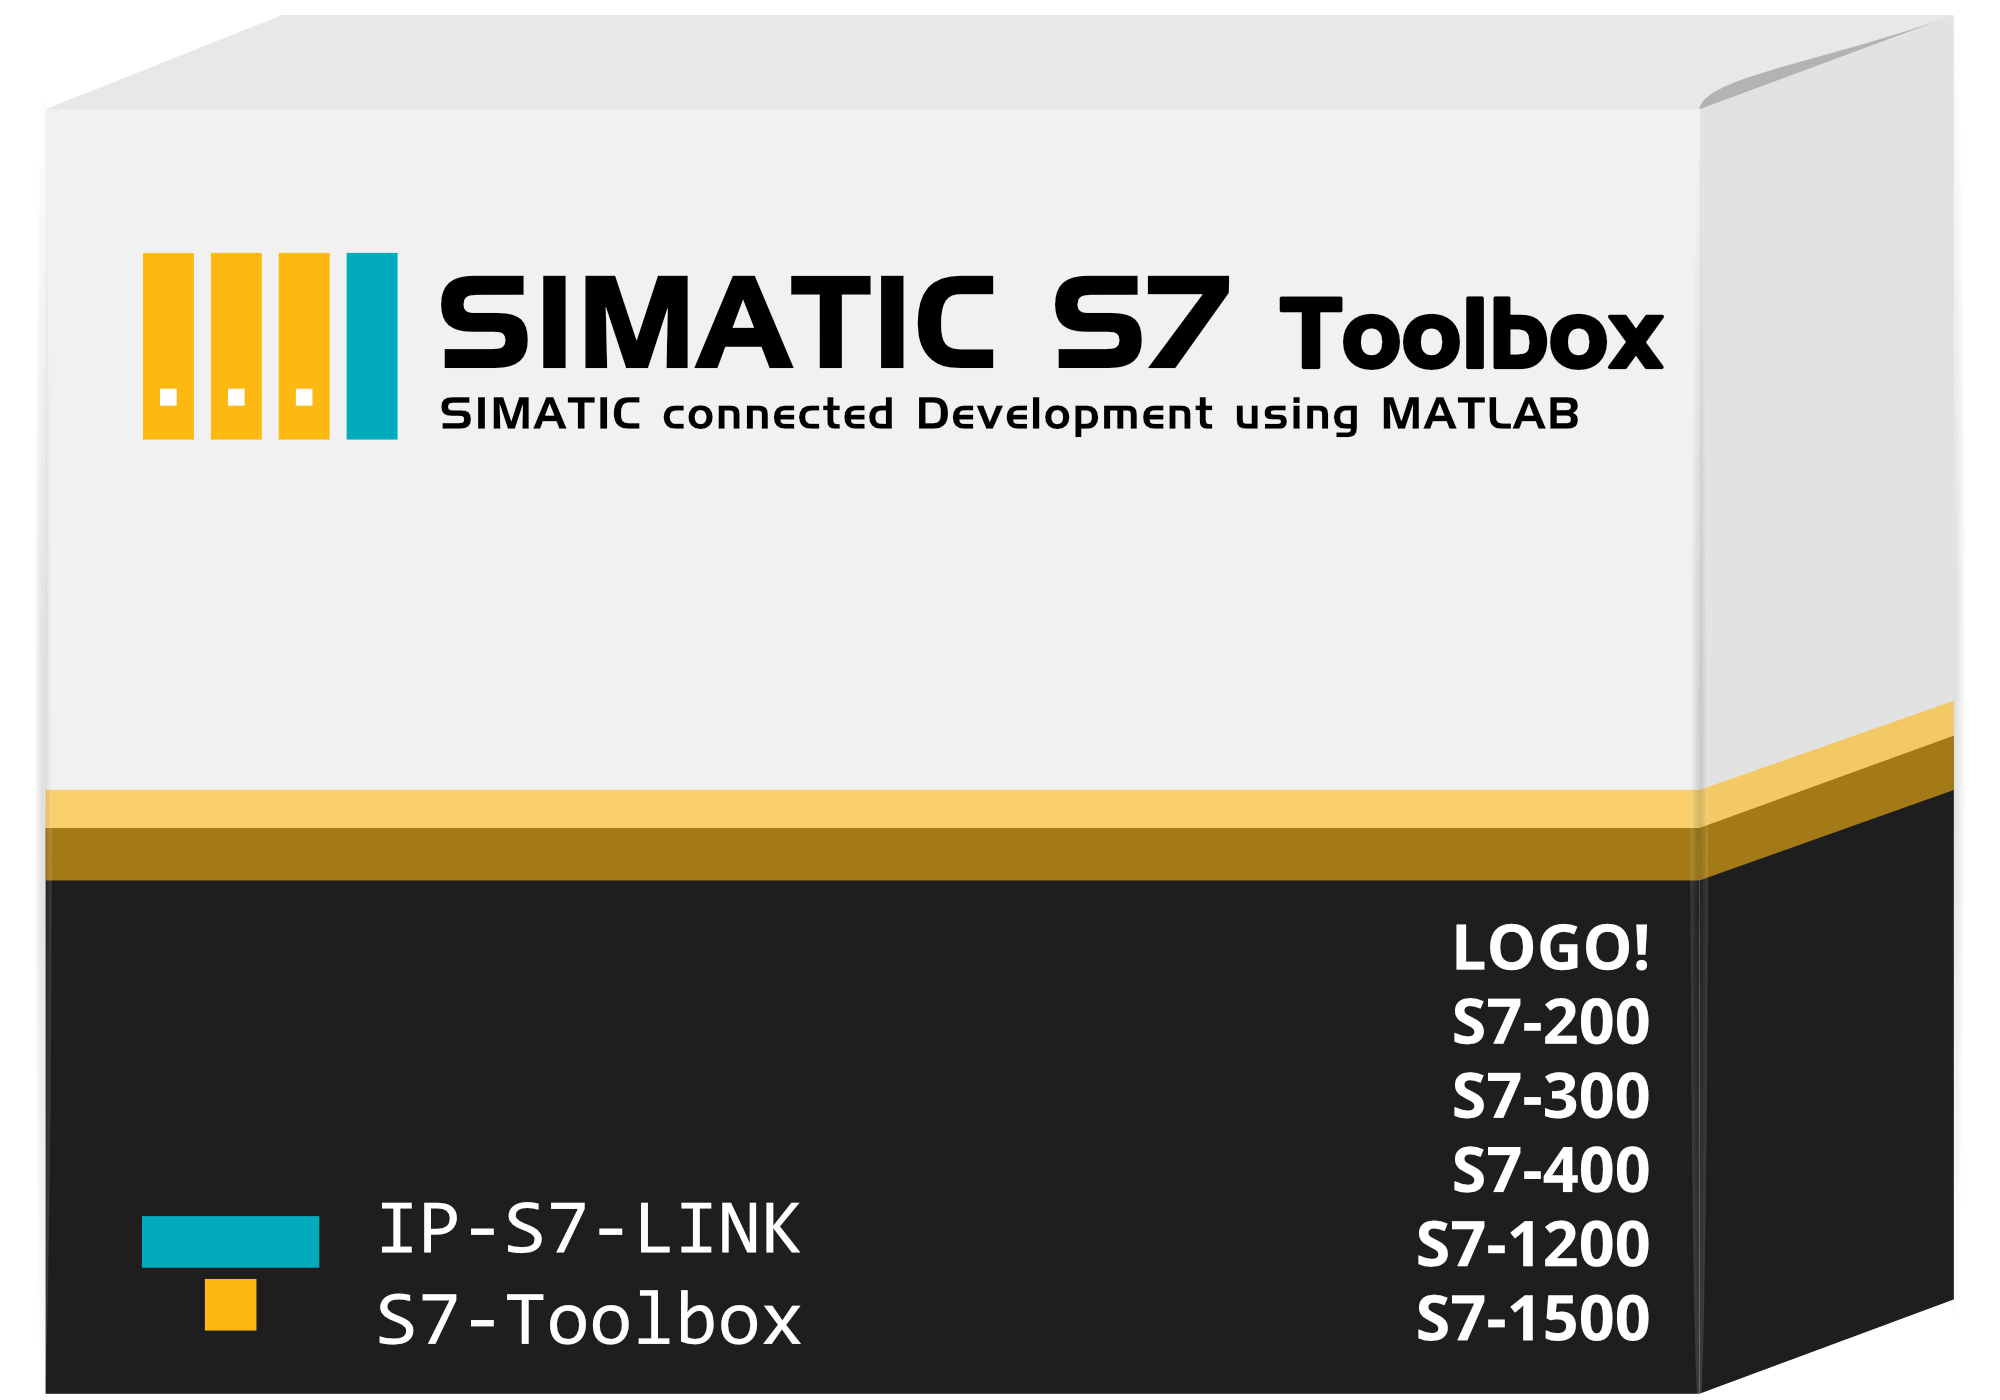 SIMATIC S7 MatLab Toolbox product image